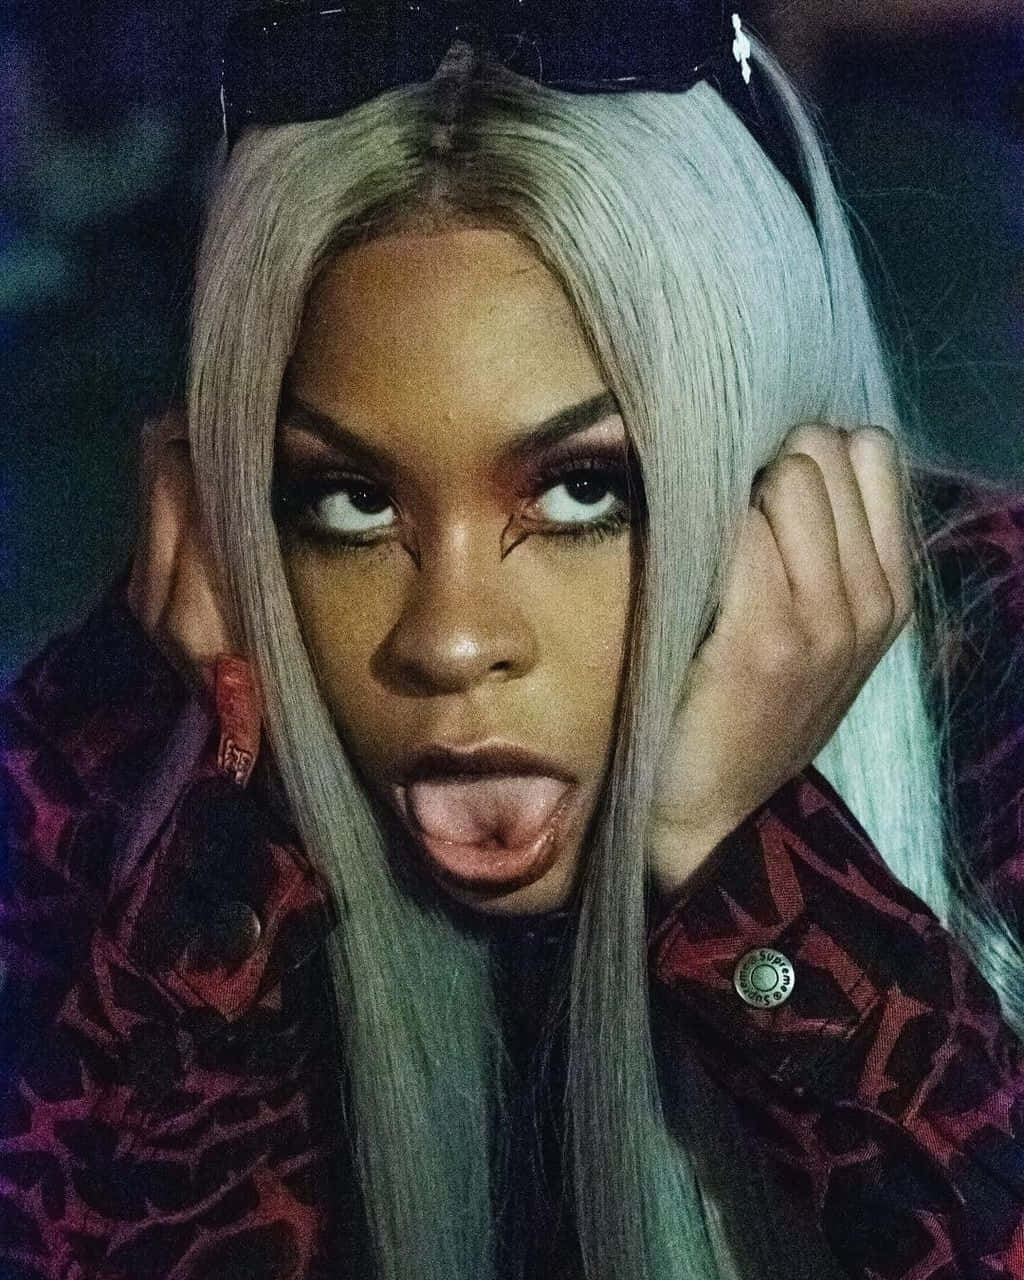 Rico Nasty shows off her abundance of confidence in this portrait Wallpaper